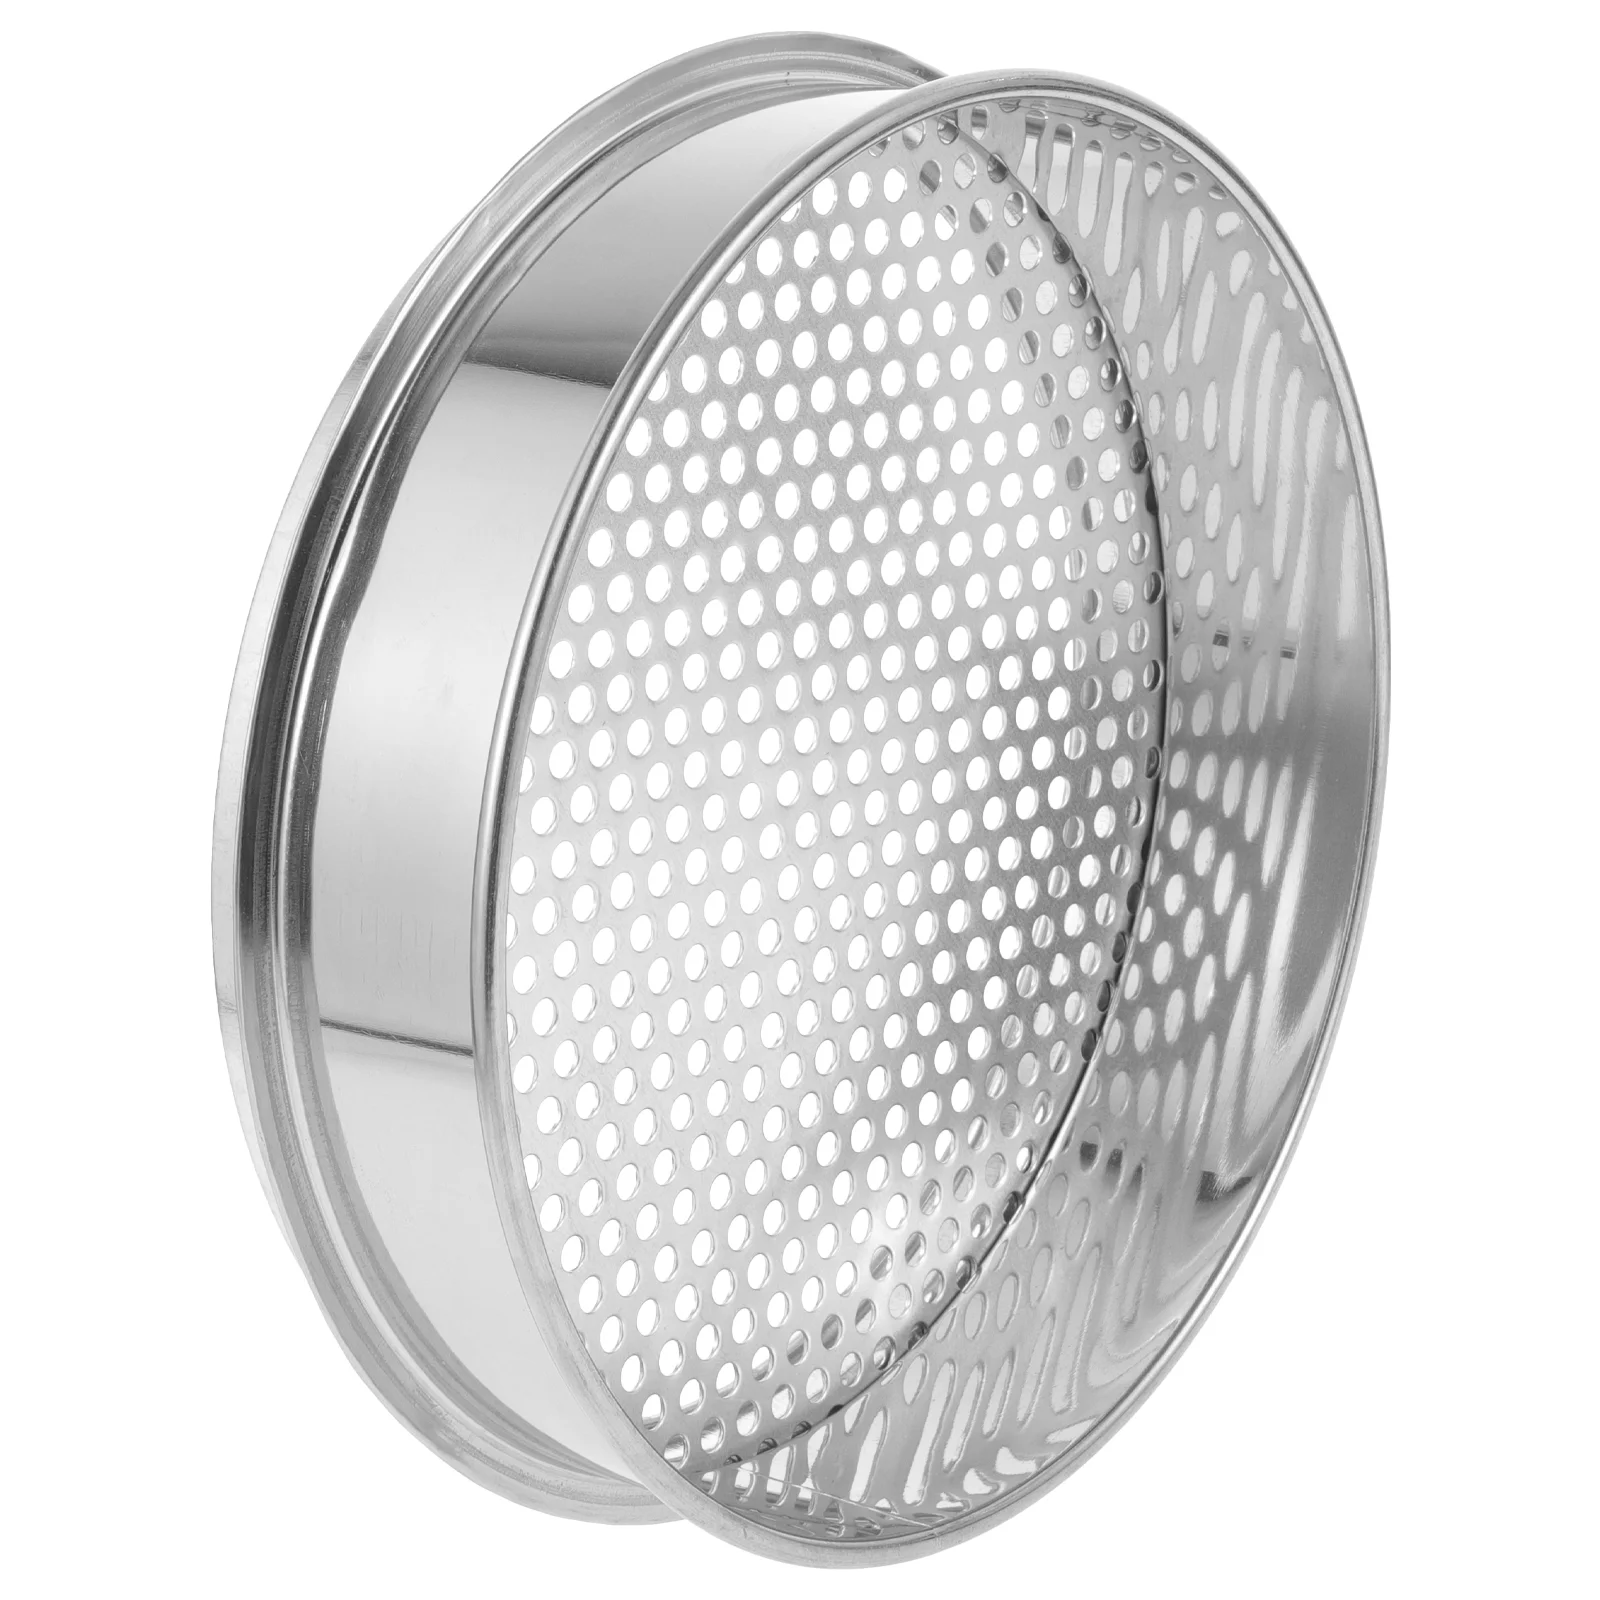 

Soil Screen Home Stainless Steel Sieve Fine Mesh Kitchen Supply Food Sifter Round Hole Grading